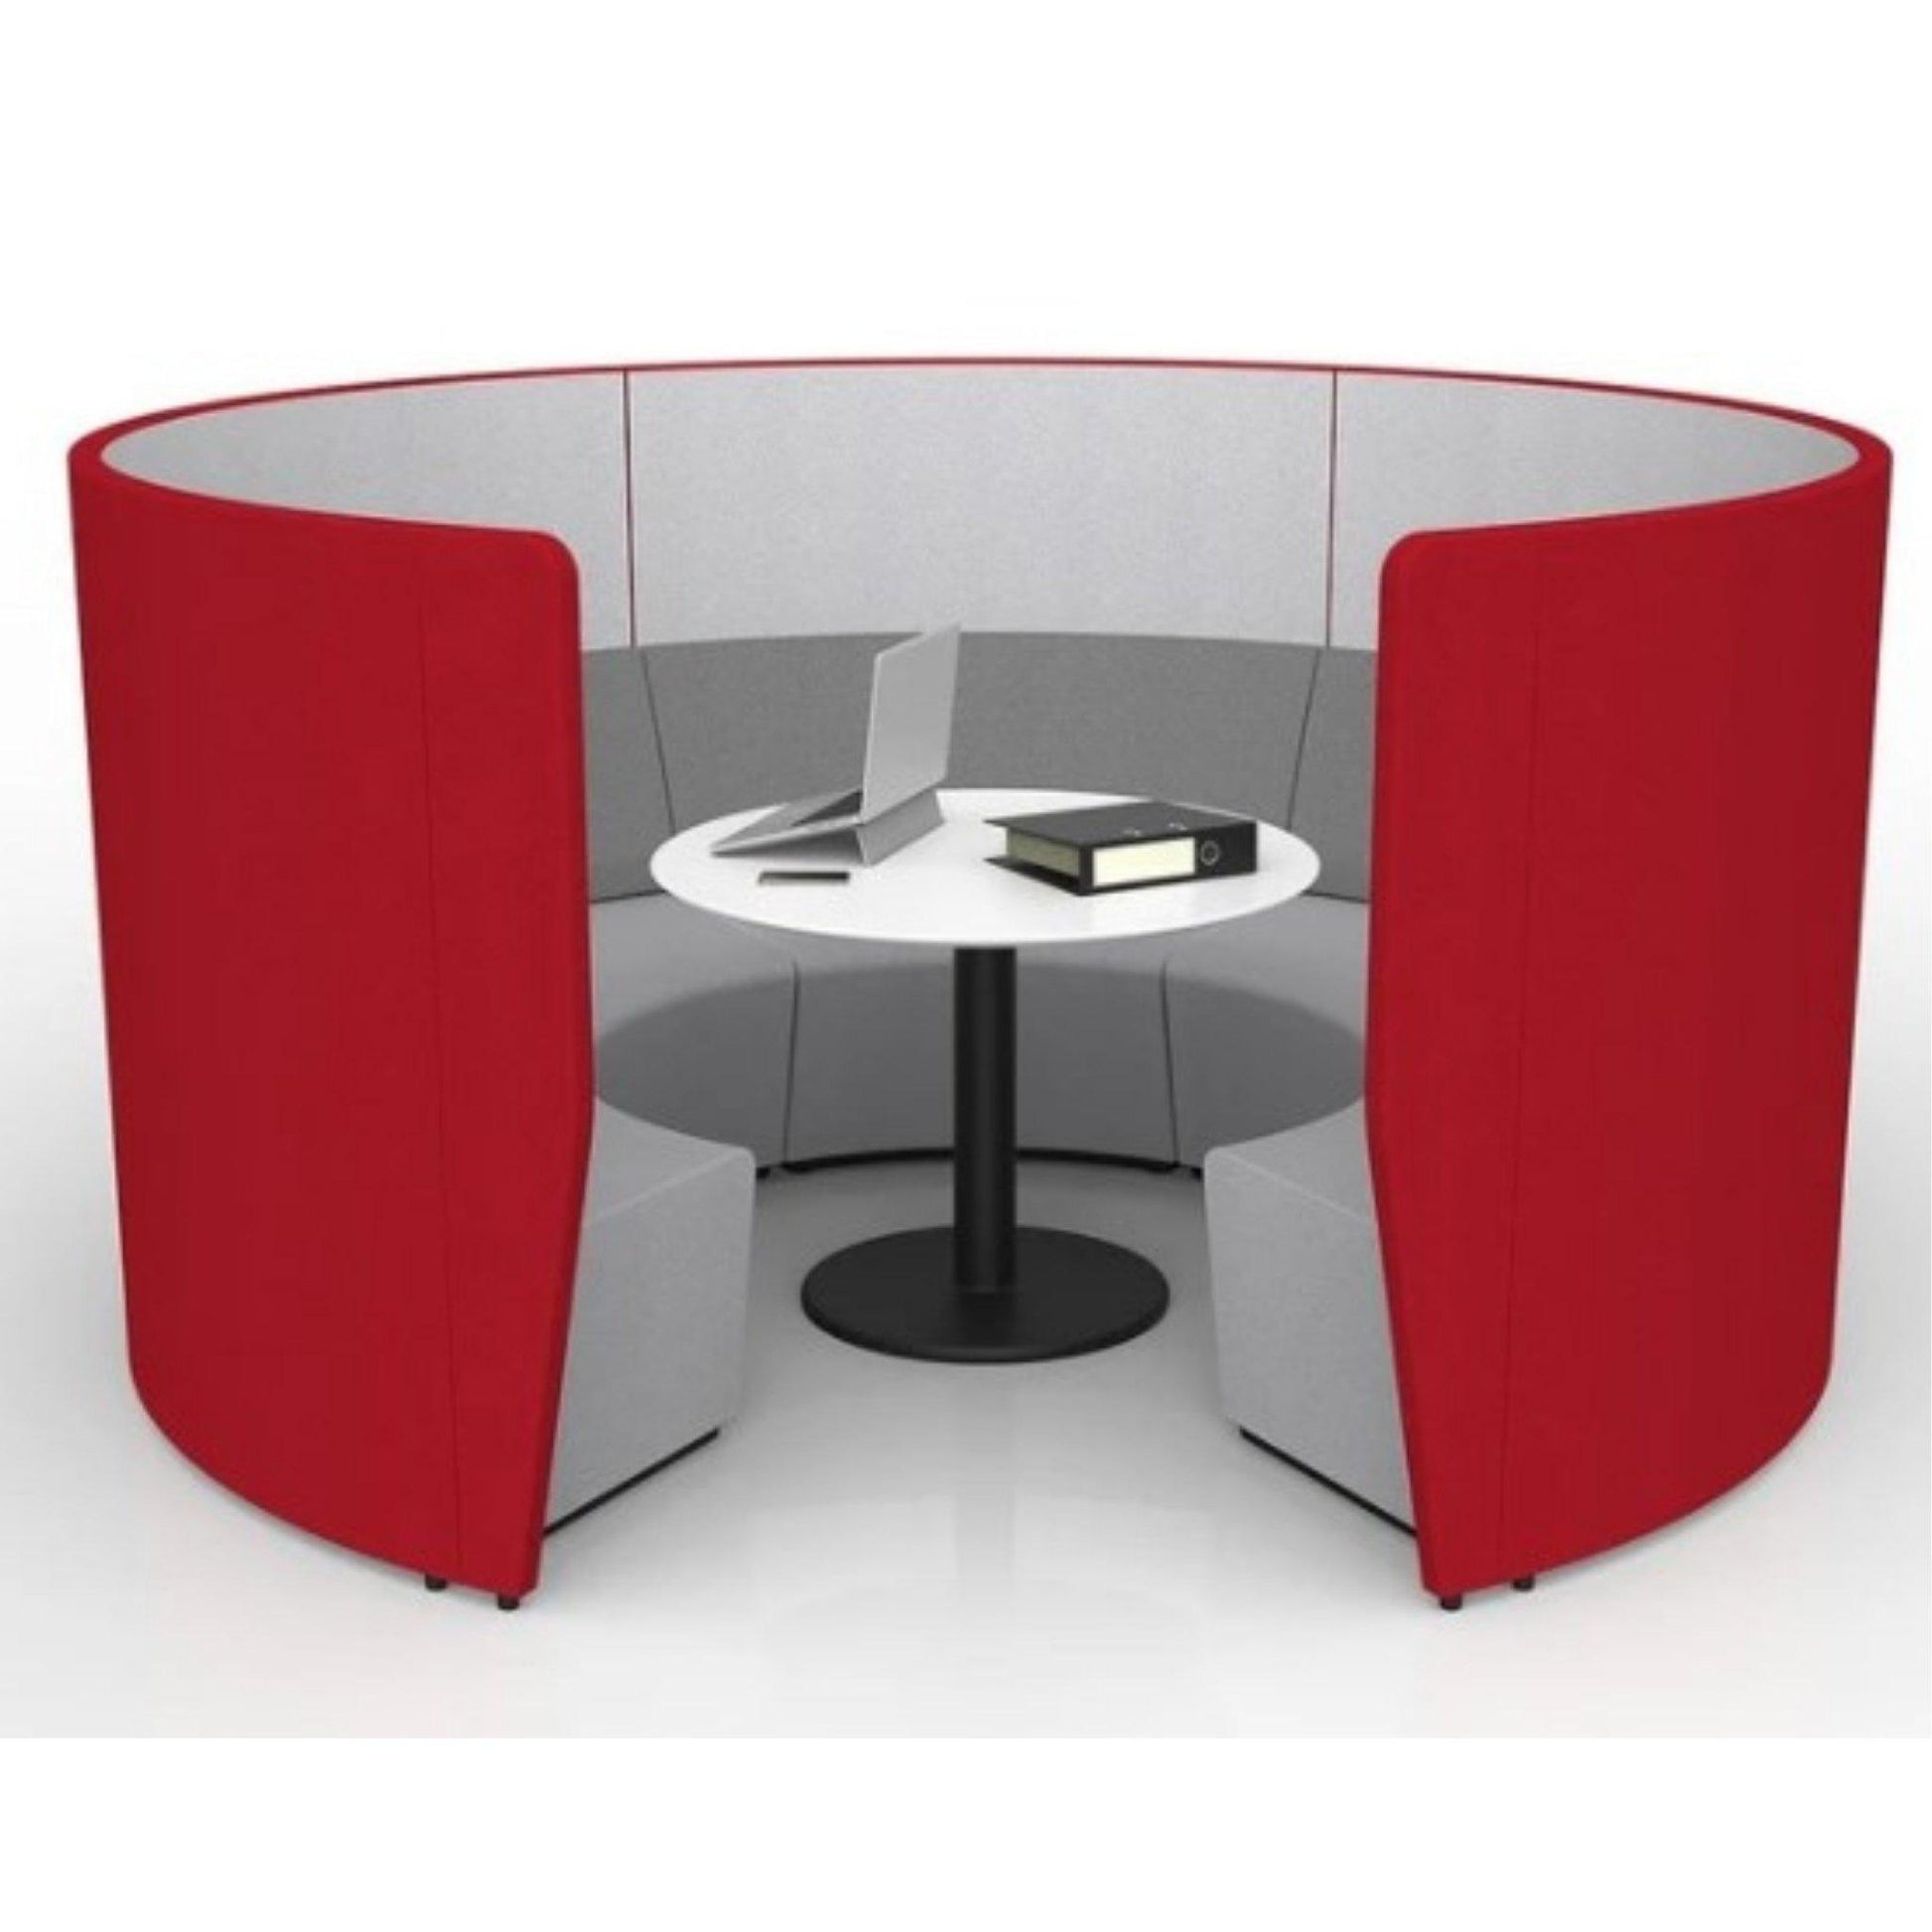 Motion Arc Collaboration Booth with Walls - Office Furniture Company 